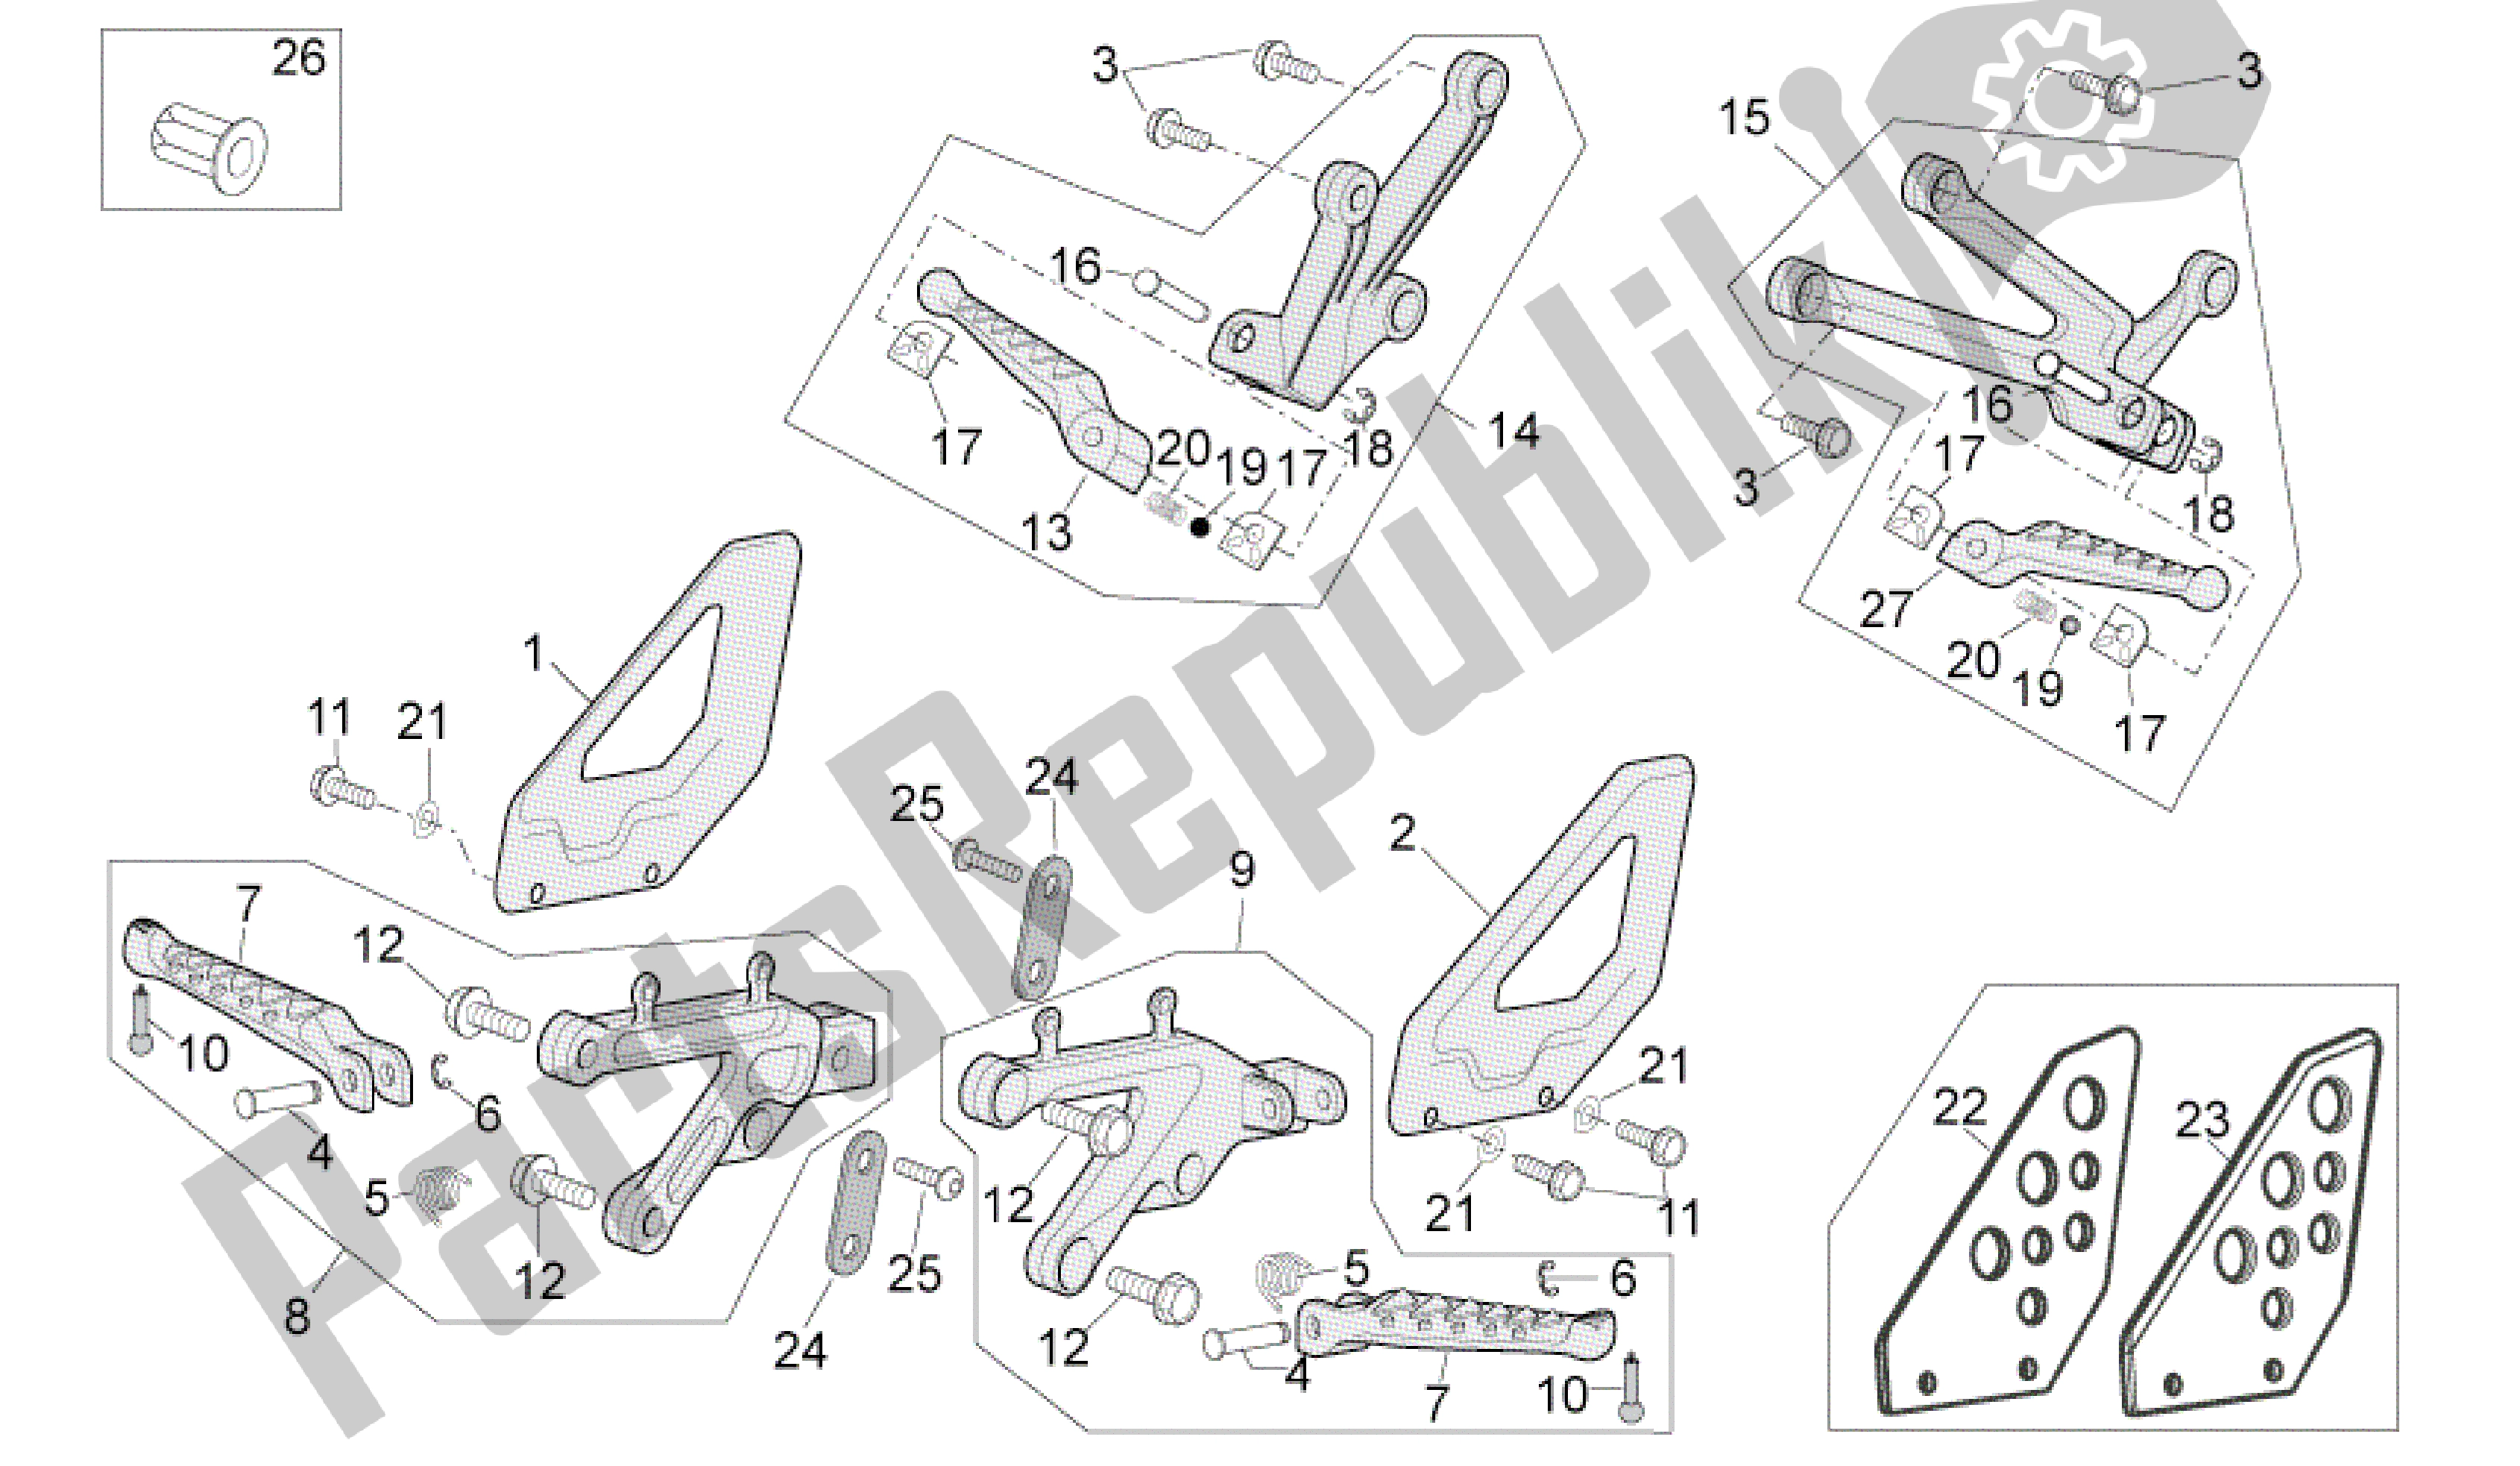 All parts for the Foot Rests of the Aprilia RSV Tuono R 3985 1000 2006 - 2009